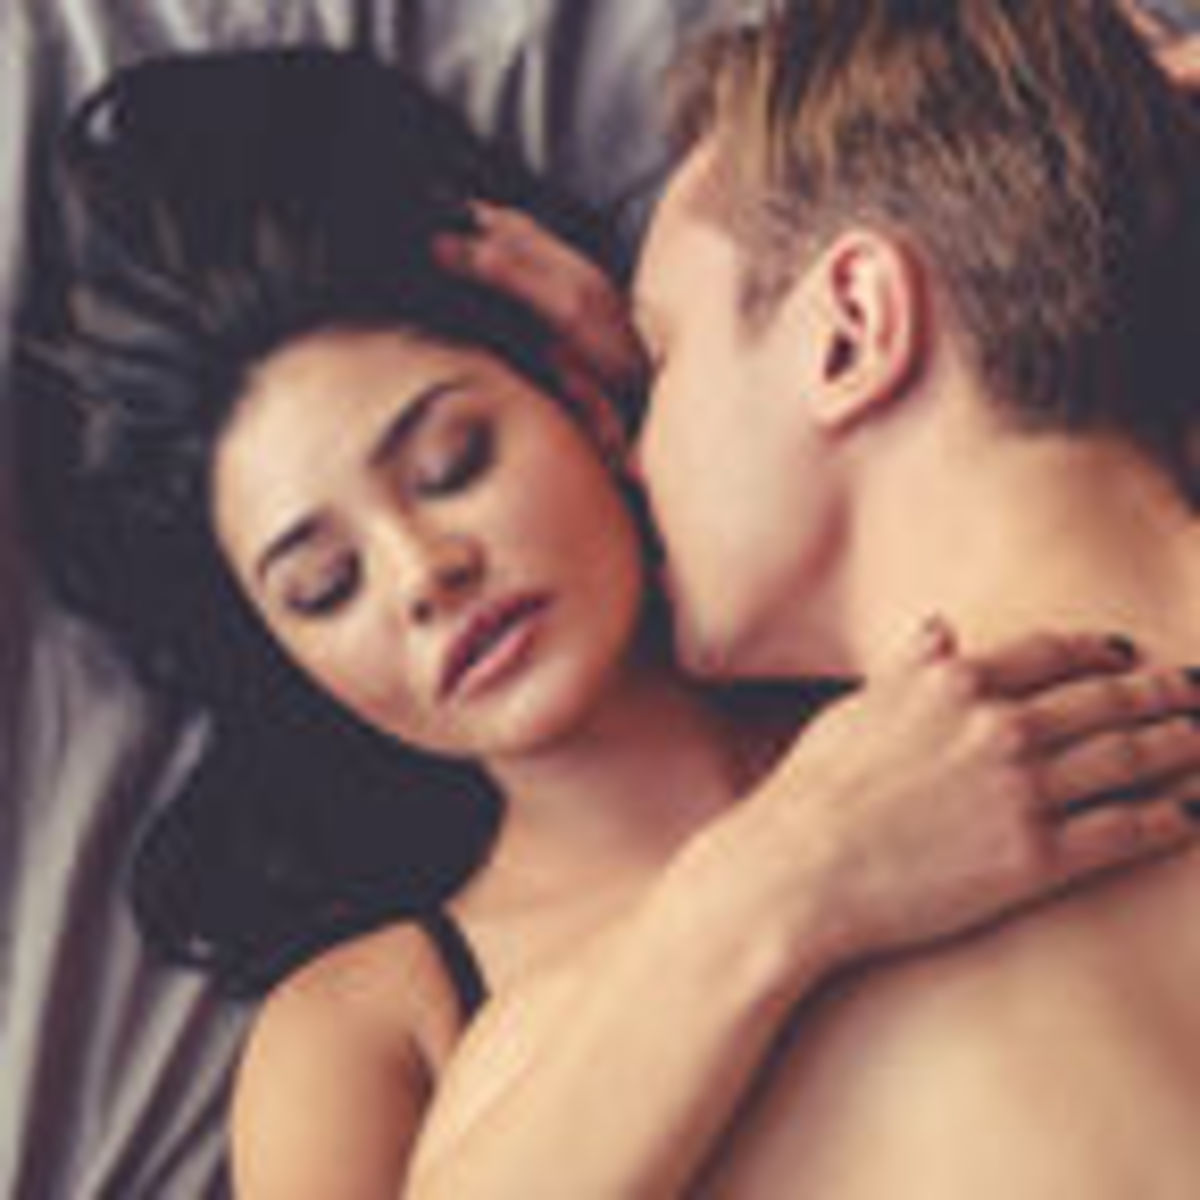 Closed Eyes Superise Porn - Do You Have Sex with Your Eyes Closed? | Psychology Today